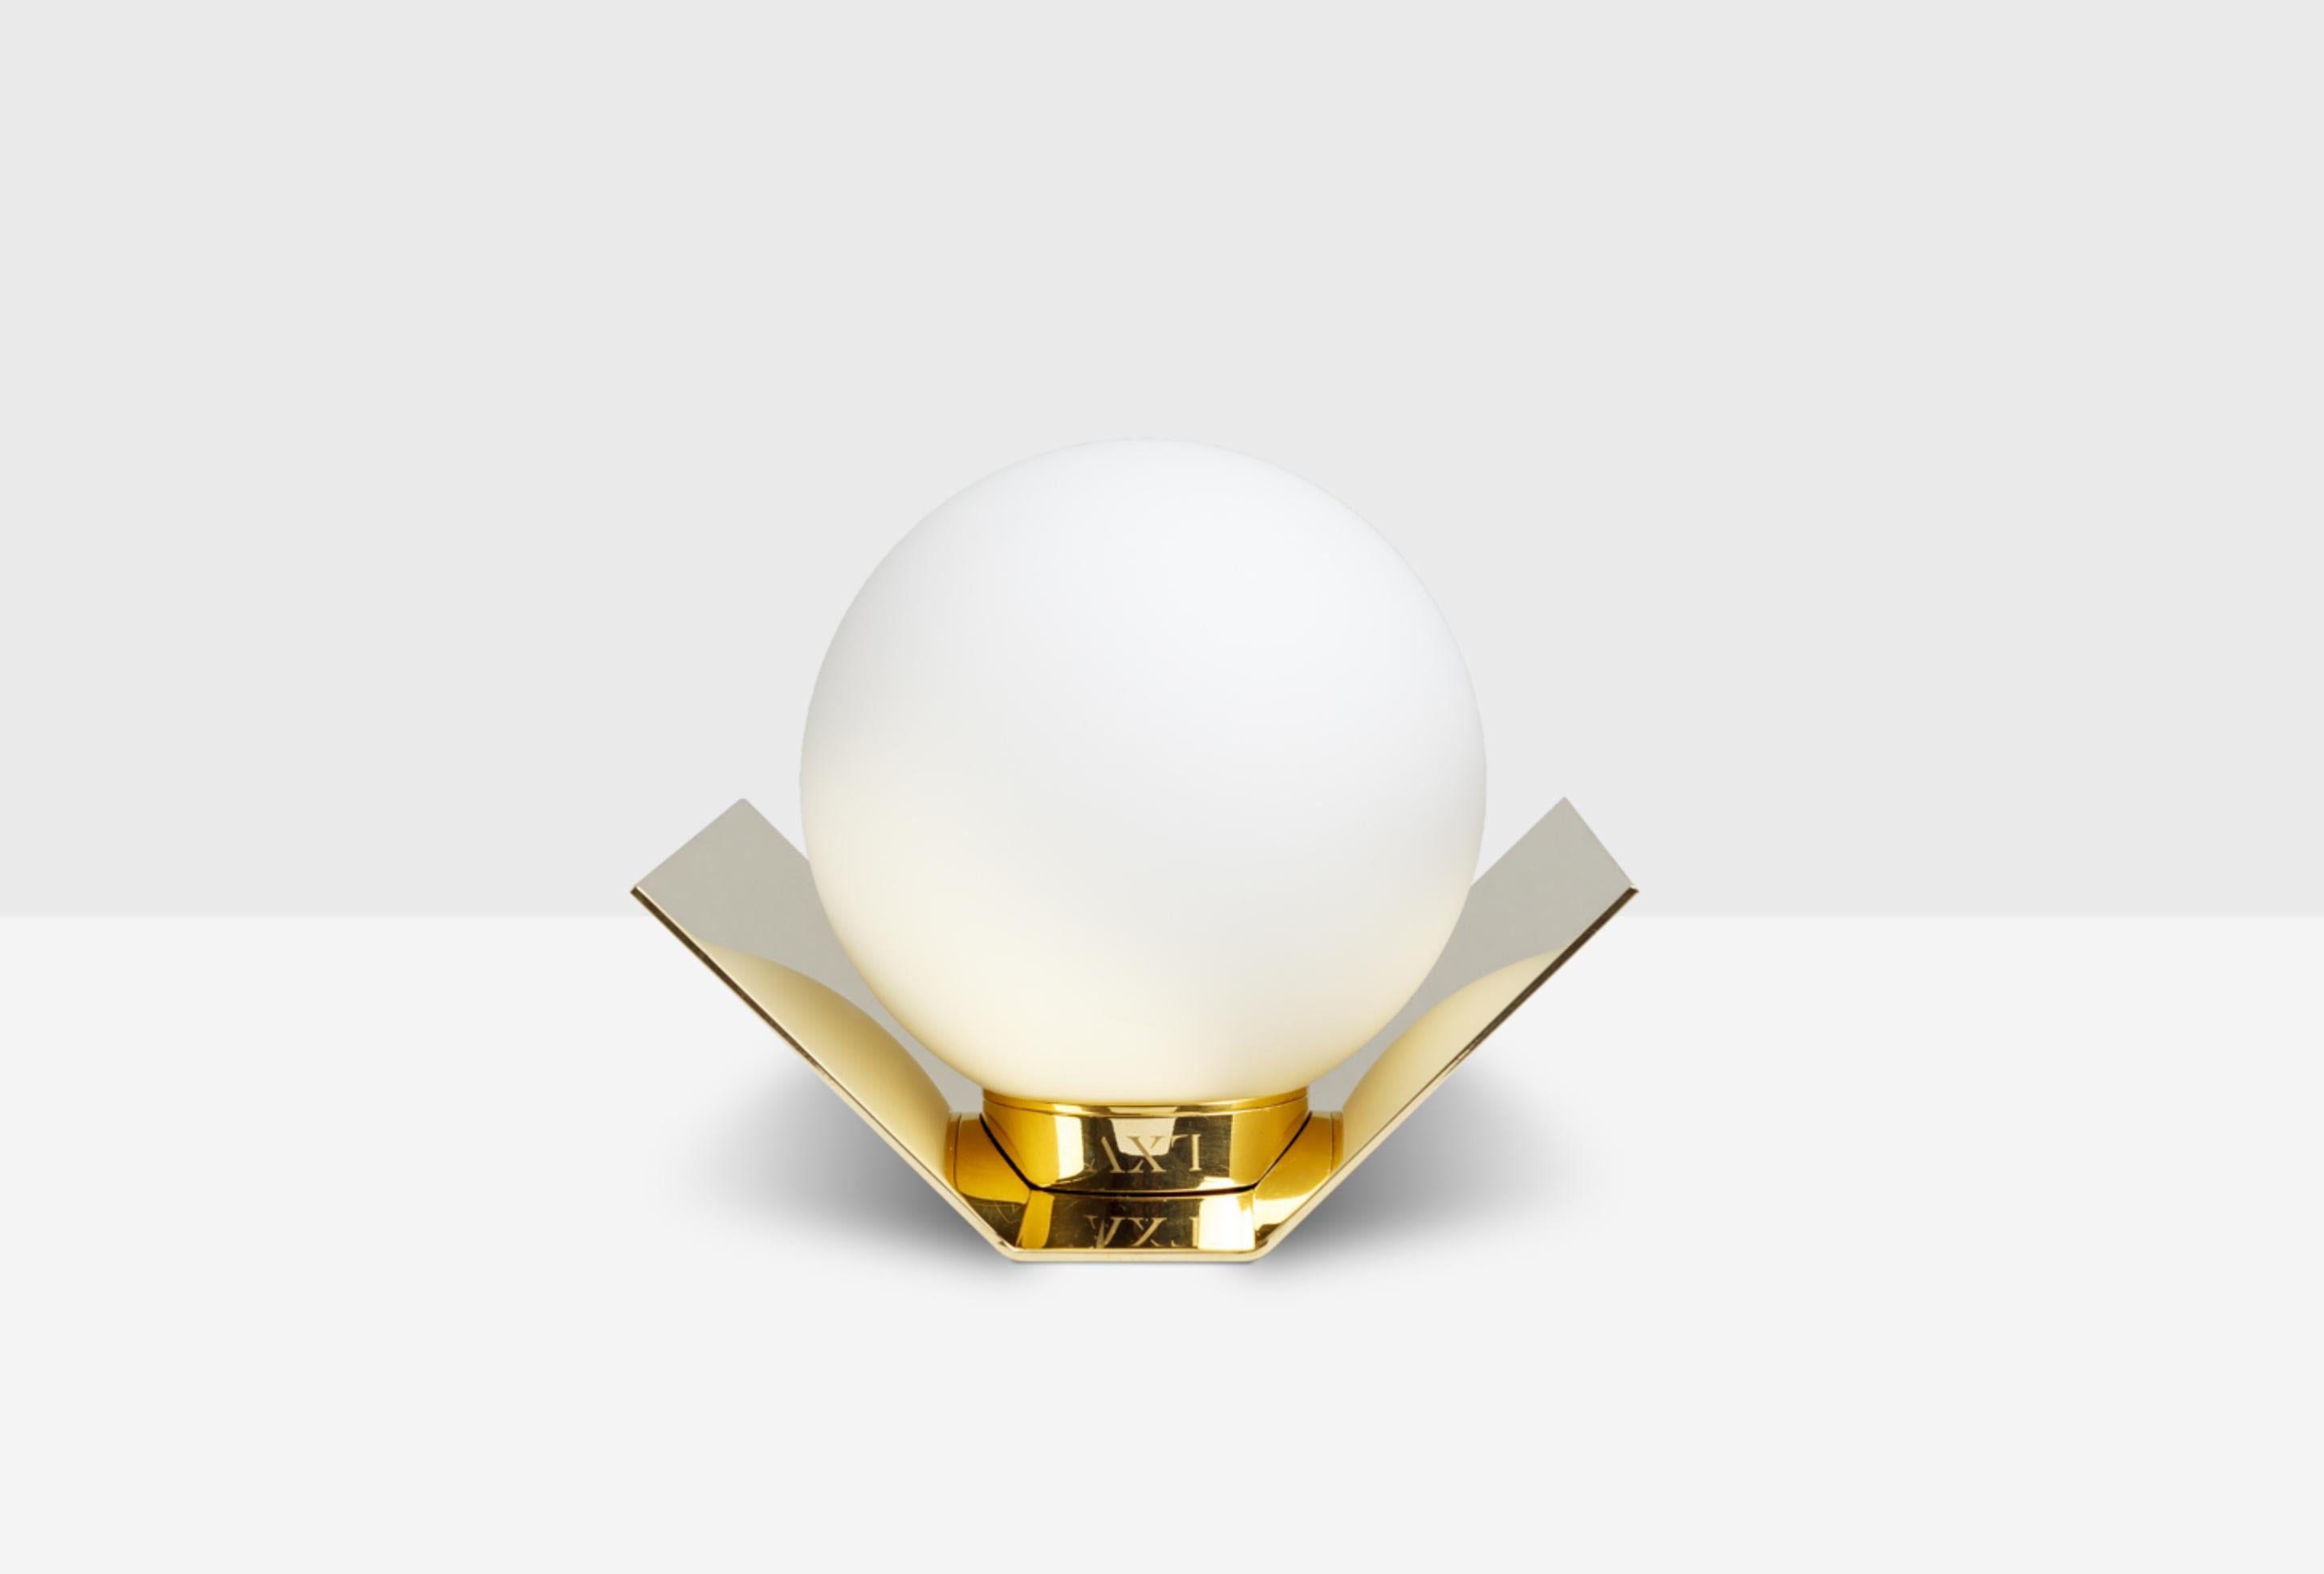 Twain solid brass wall light by Lexavala
Dimensions: W 16 x D 16 x H 13 cm 
Materials: Brass, glass.

There are two lenghts of socket covers, extending over the LED. Two short are to be found in Suspended and Surface, and one long in the Wall